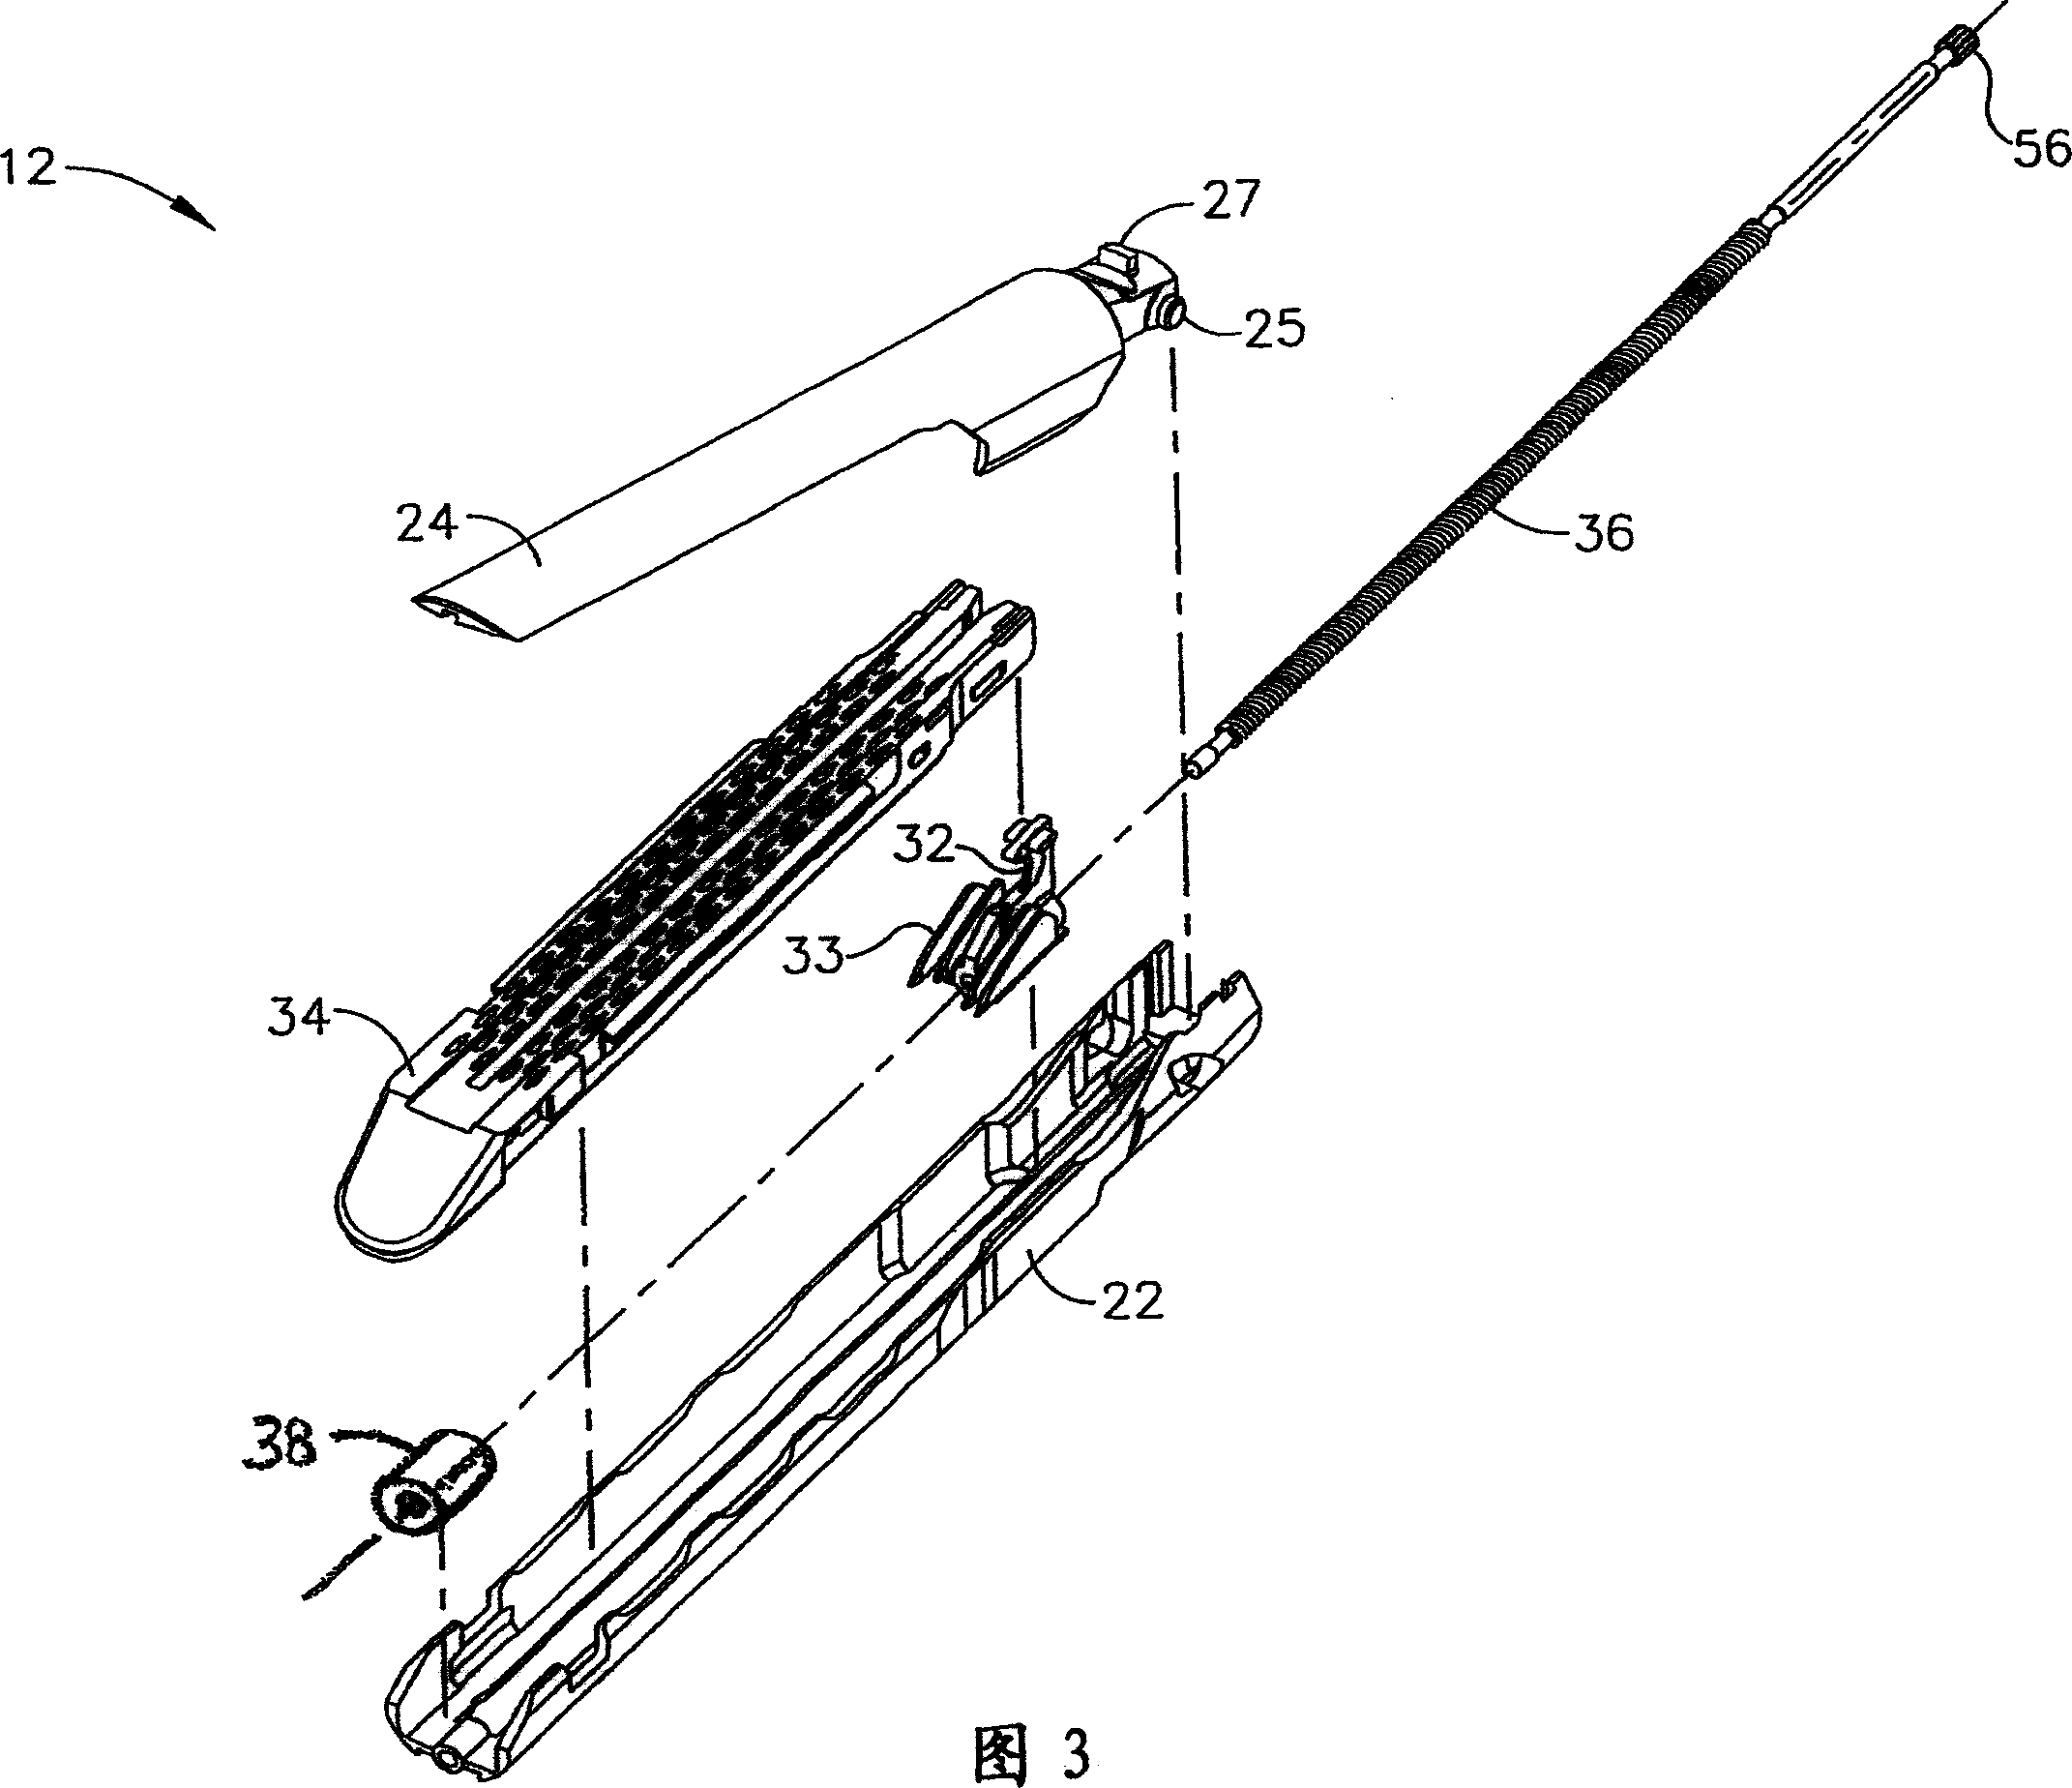 Surgical instrument having a removable battery